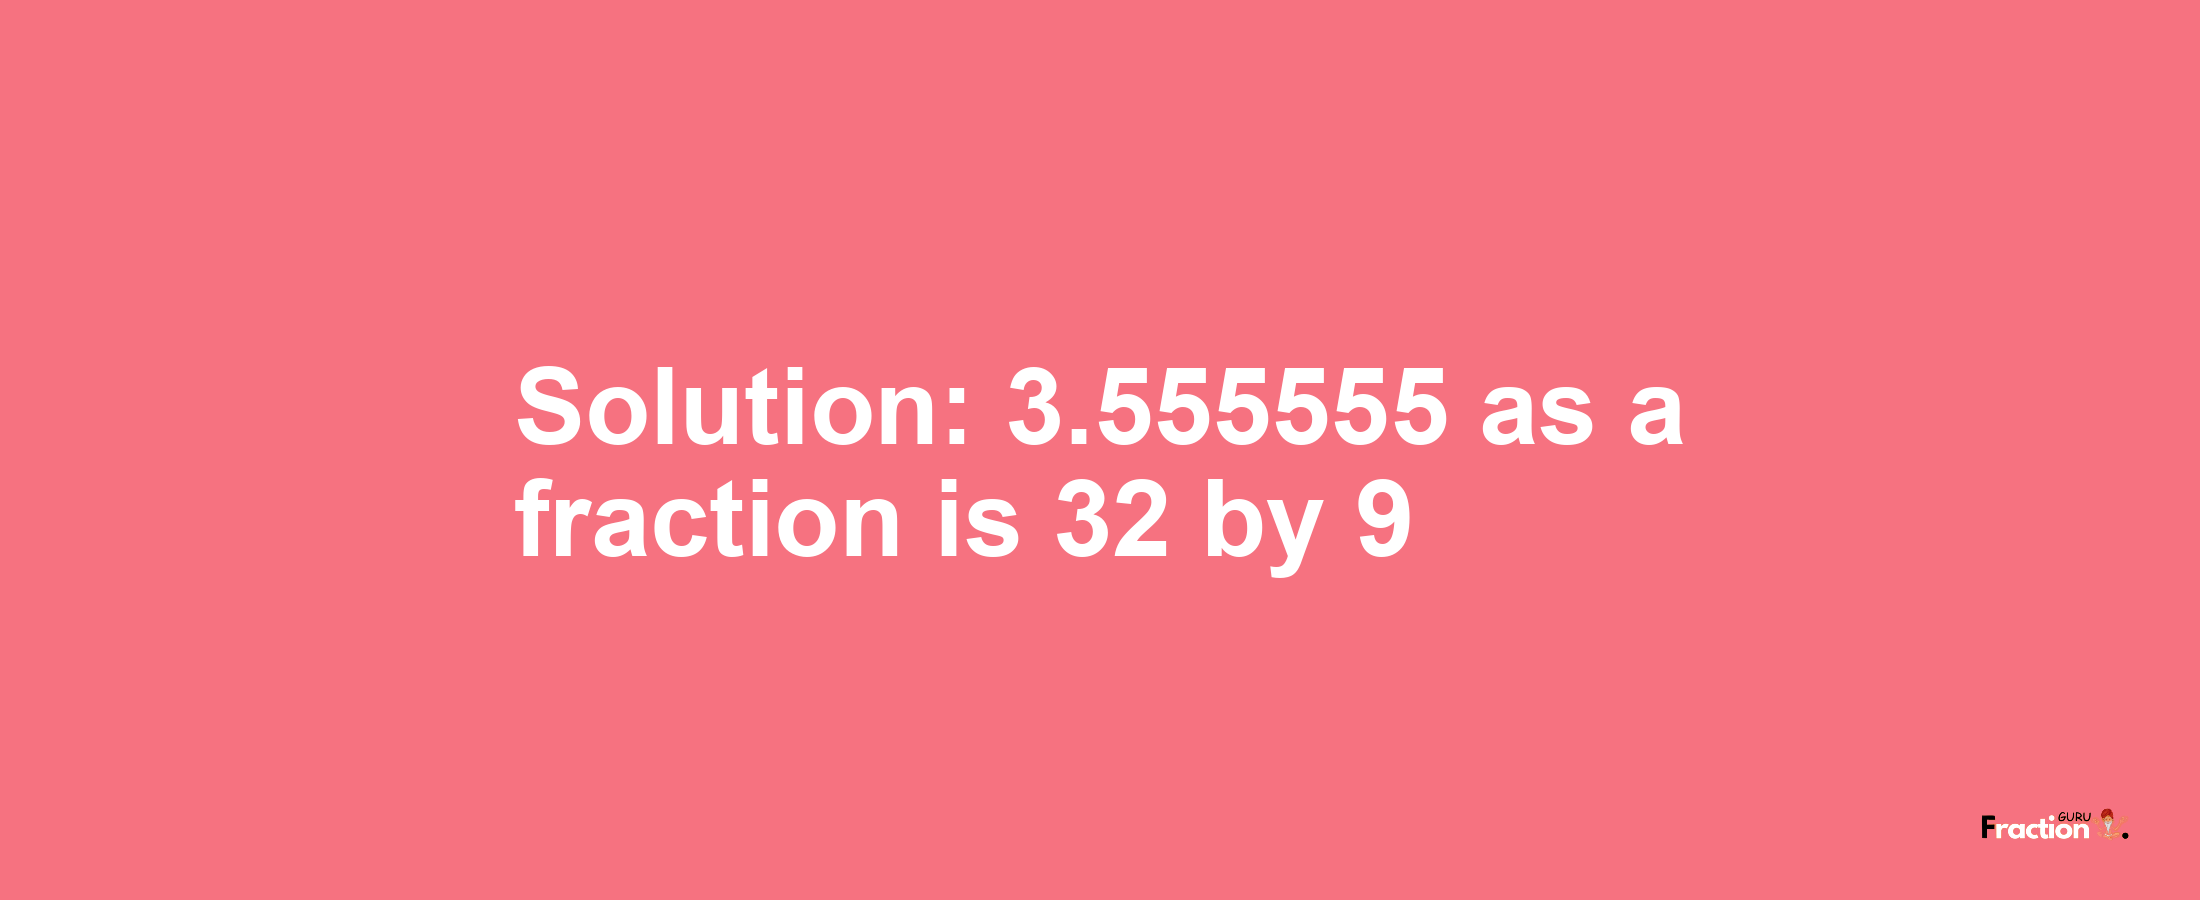 Solution:3.555555 as a fraction is 32/9